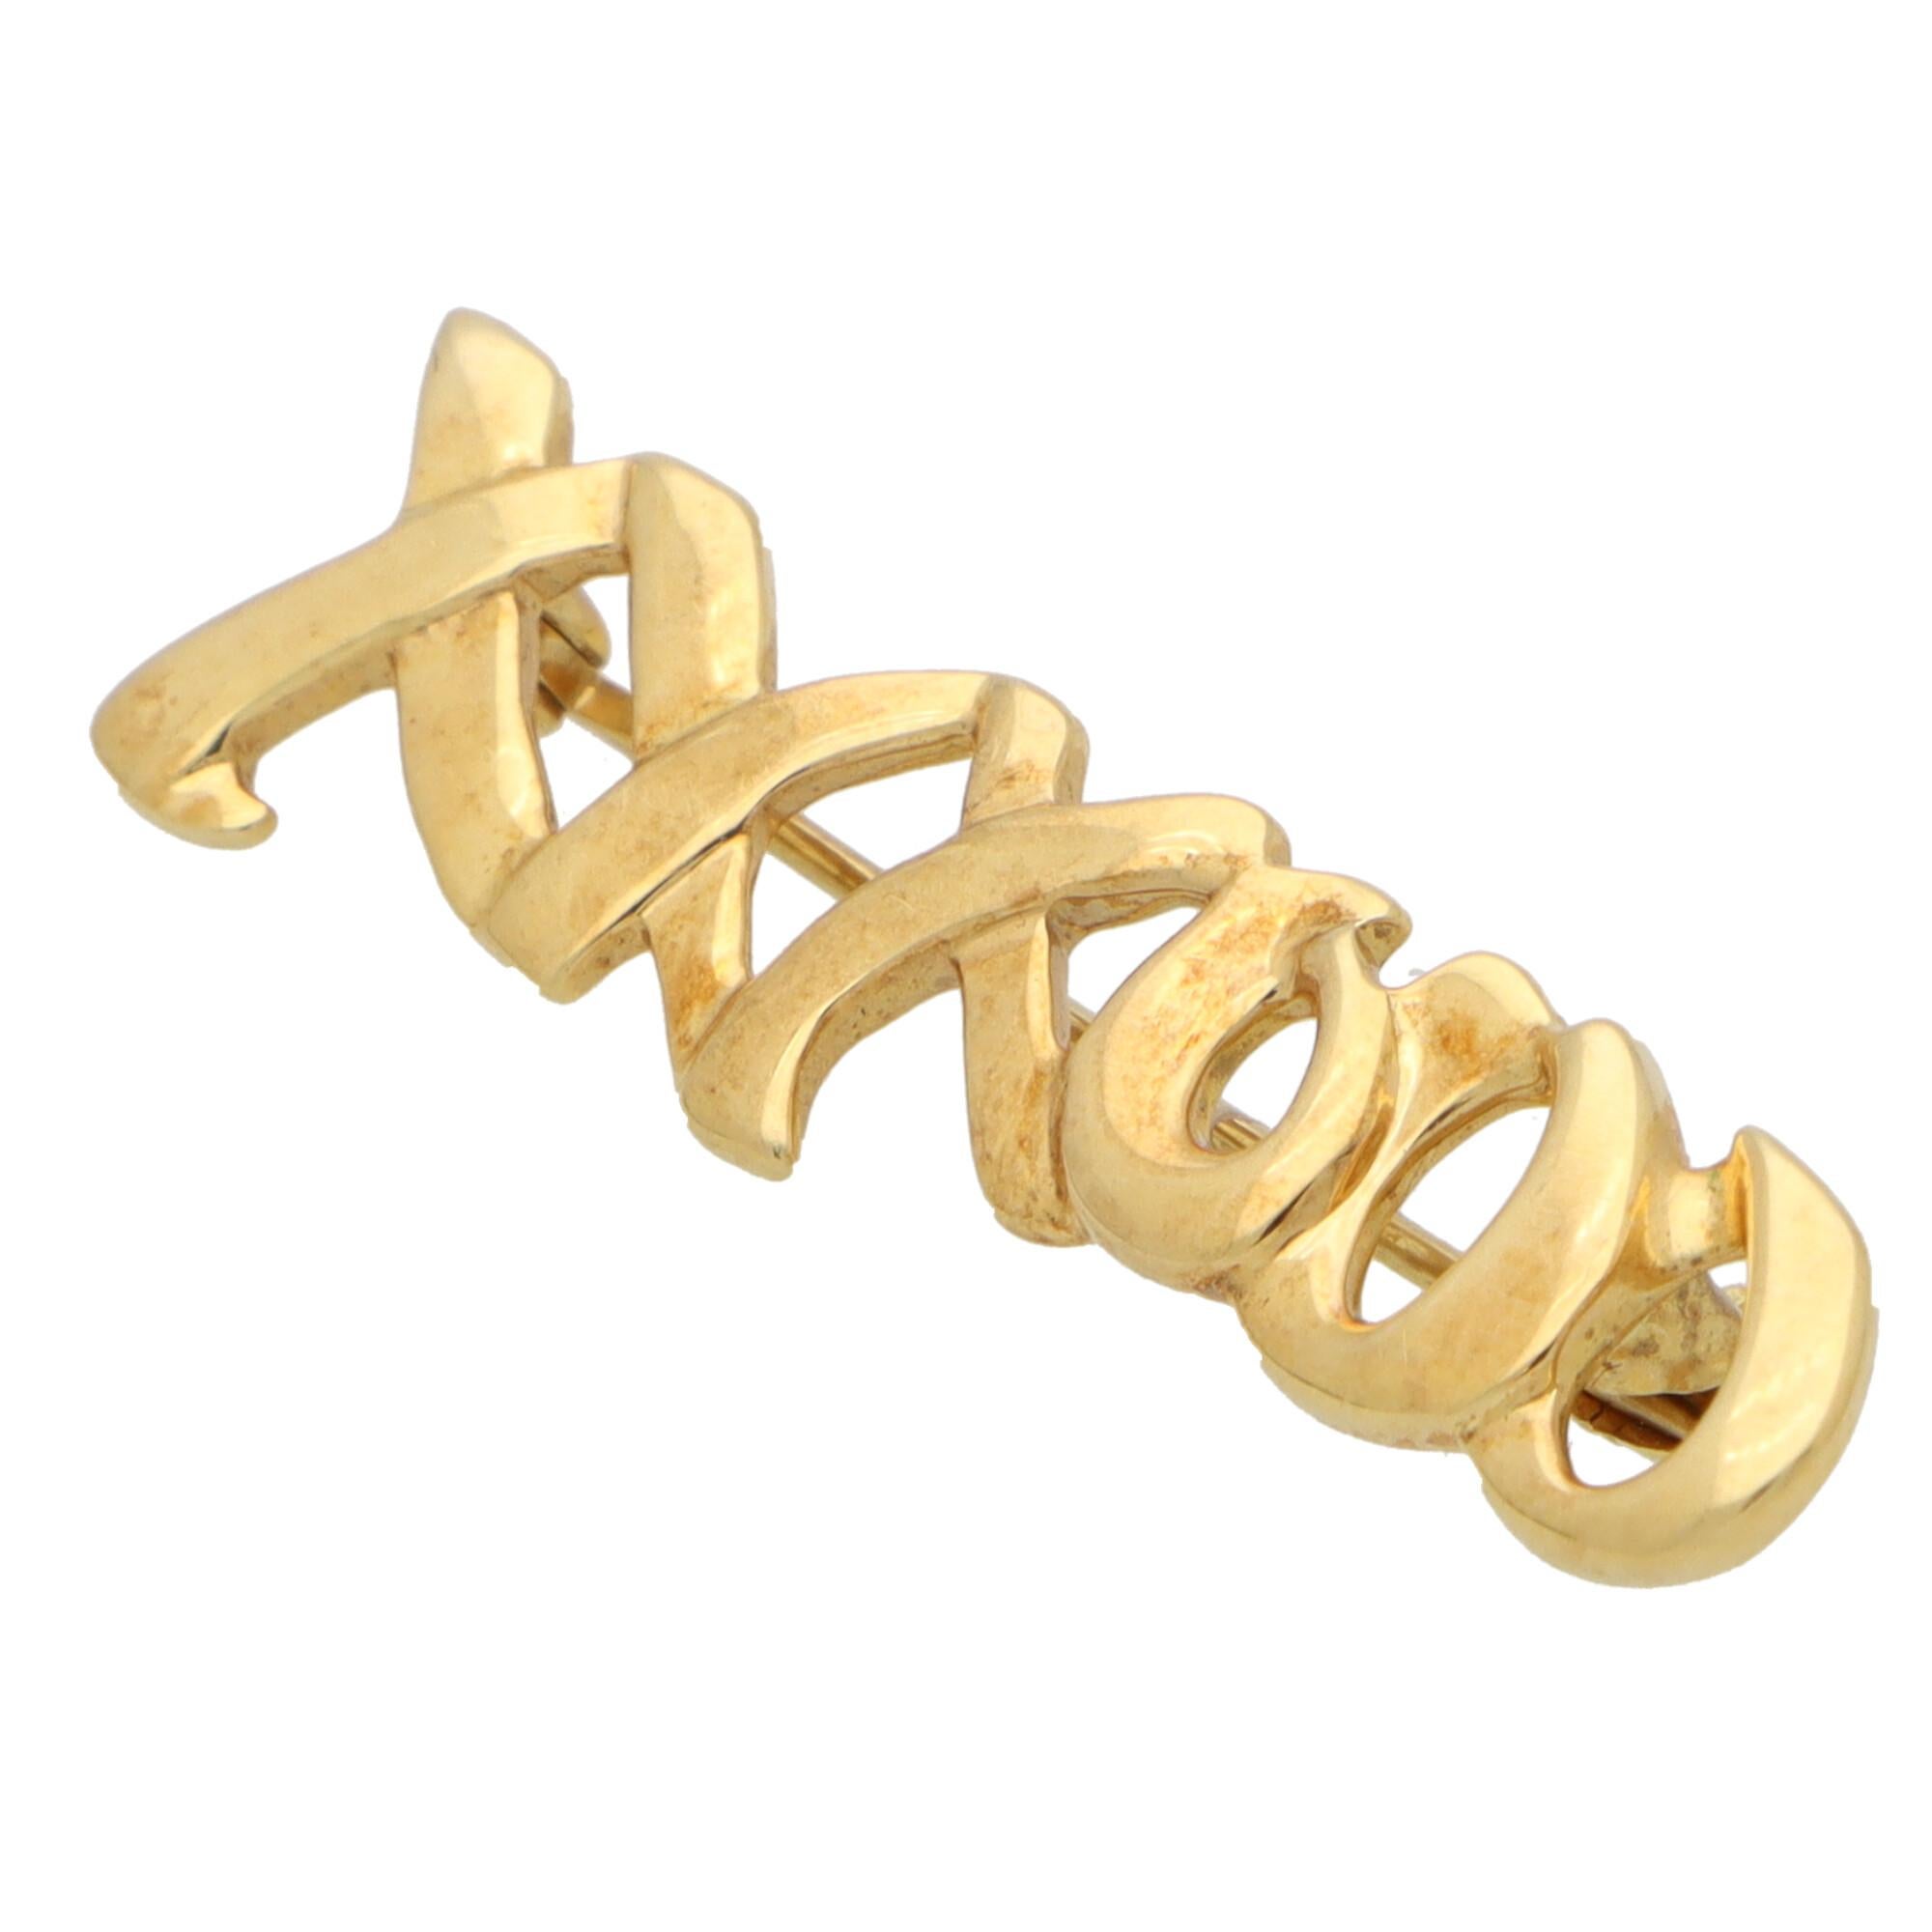 A beautiful vintage Paloma Picasso for Tiffany & Co. 'Love and Kisses' brooch set in solid 18k yellow gold.

The brooch is simply set with a 'XXXOOO' motif to symbolise the common anagram for love and kisses. It is secured to reverse with a long pin